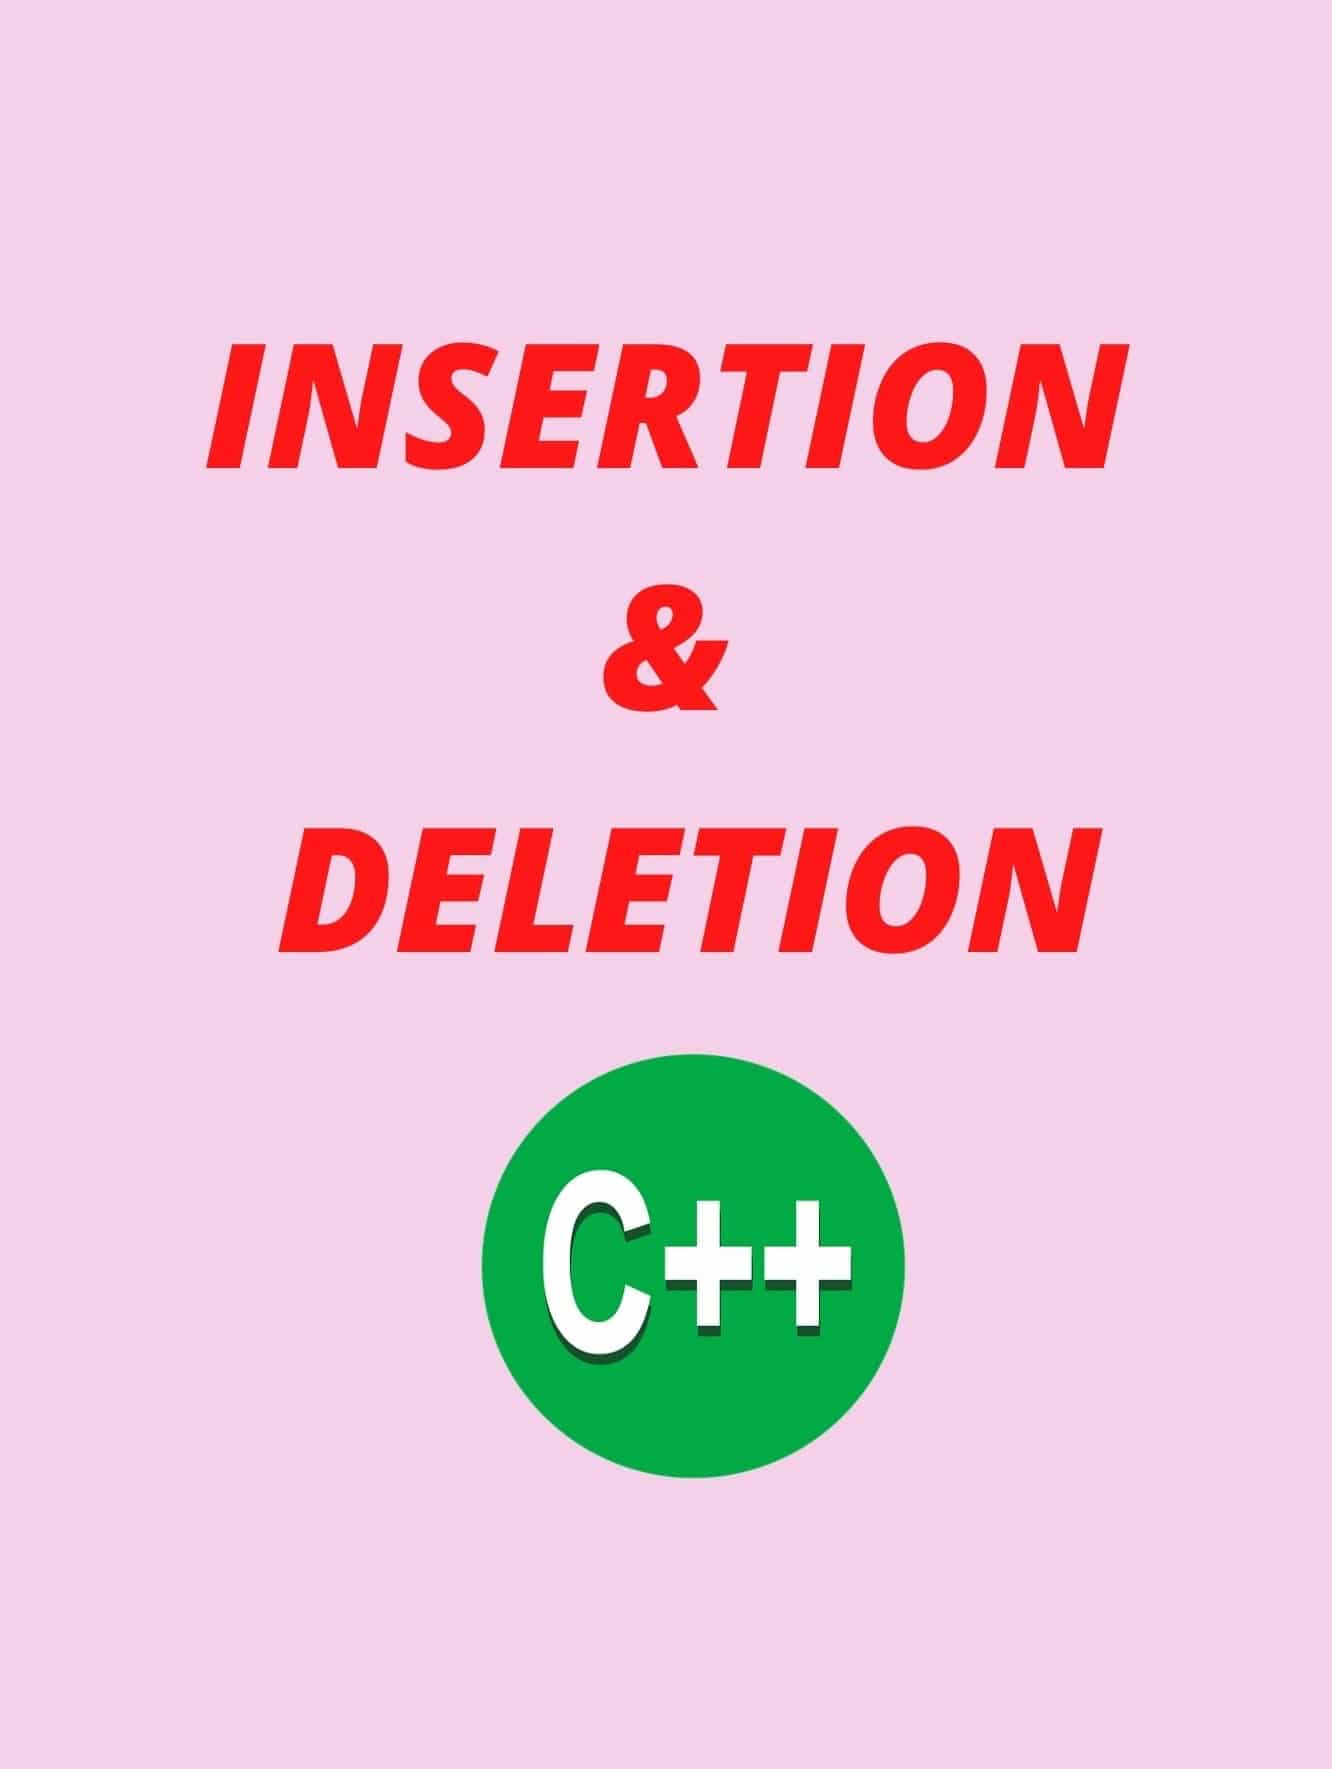 Insertion and deletion in an array using CPP